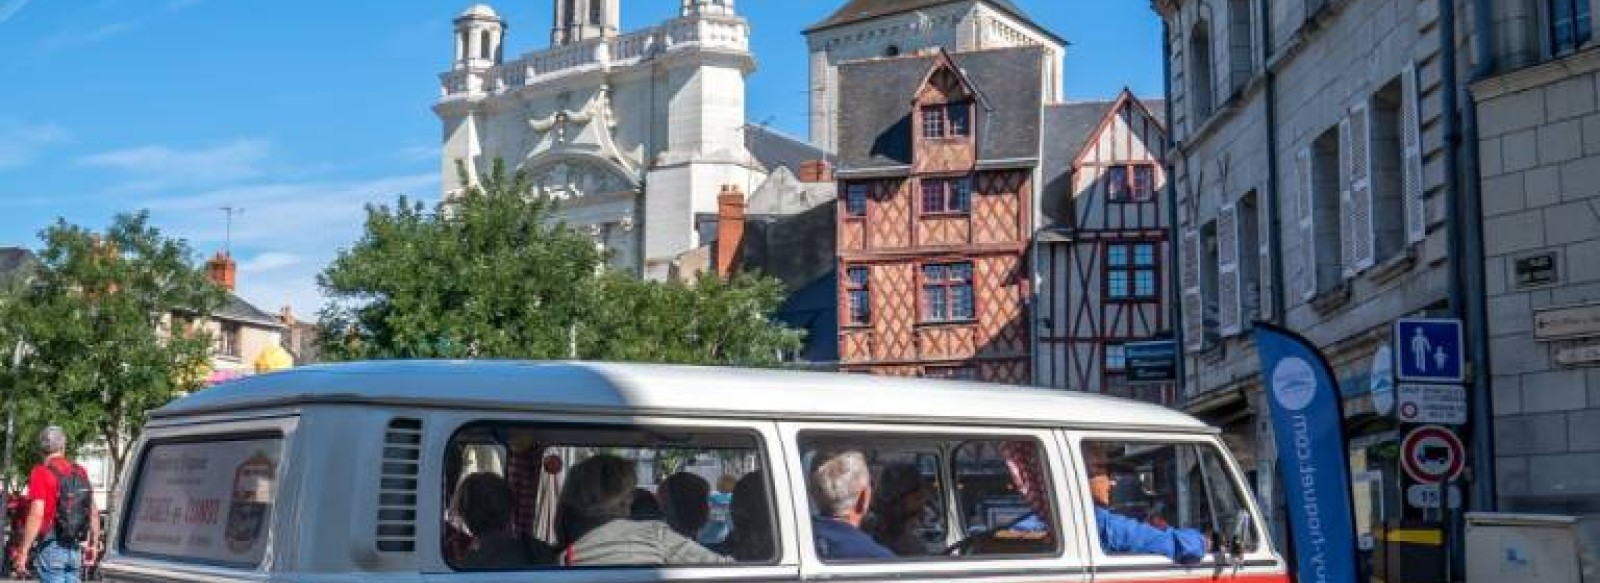 LOIRE VINTAGE DISCOVERY